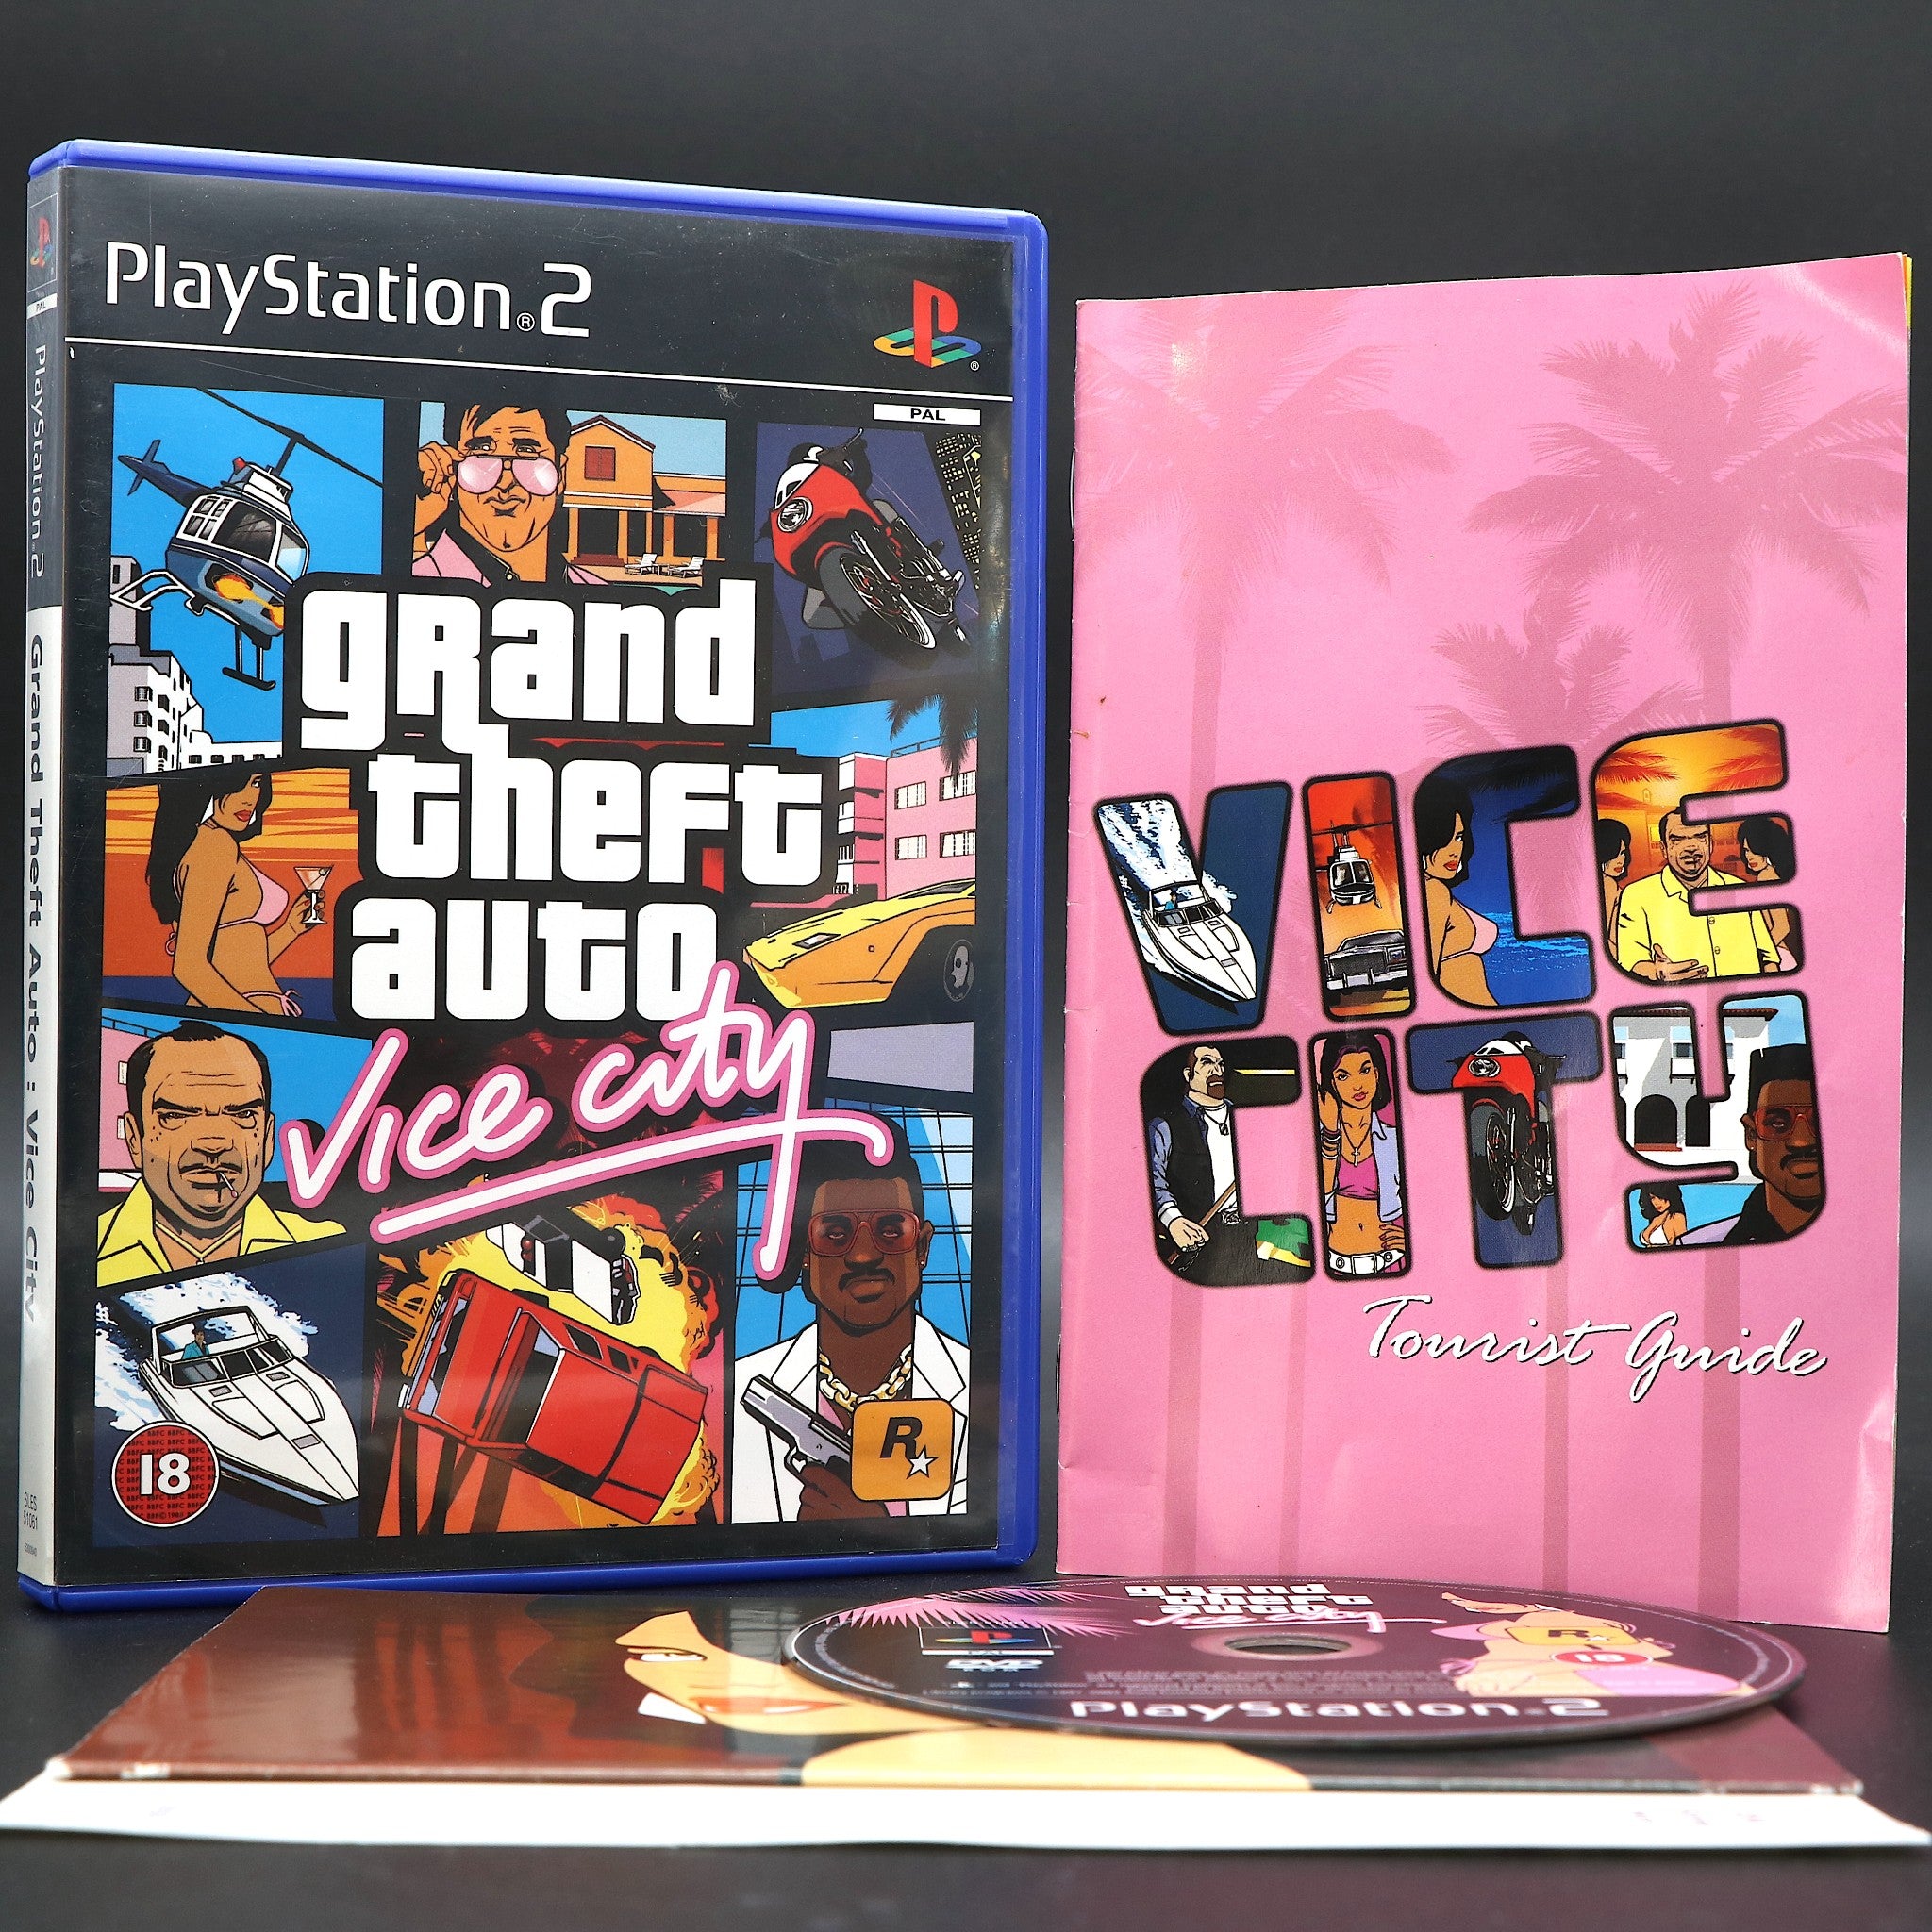 Grand Theft Auto Vice City (GTA) With Map | Sony PS2 Game | VGC!